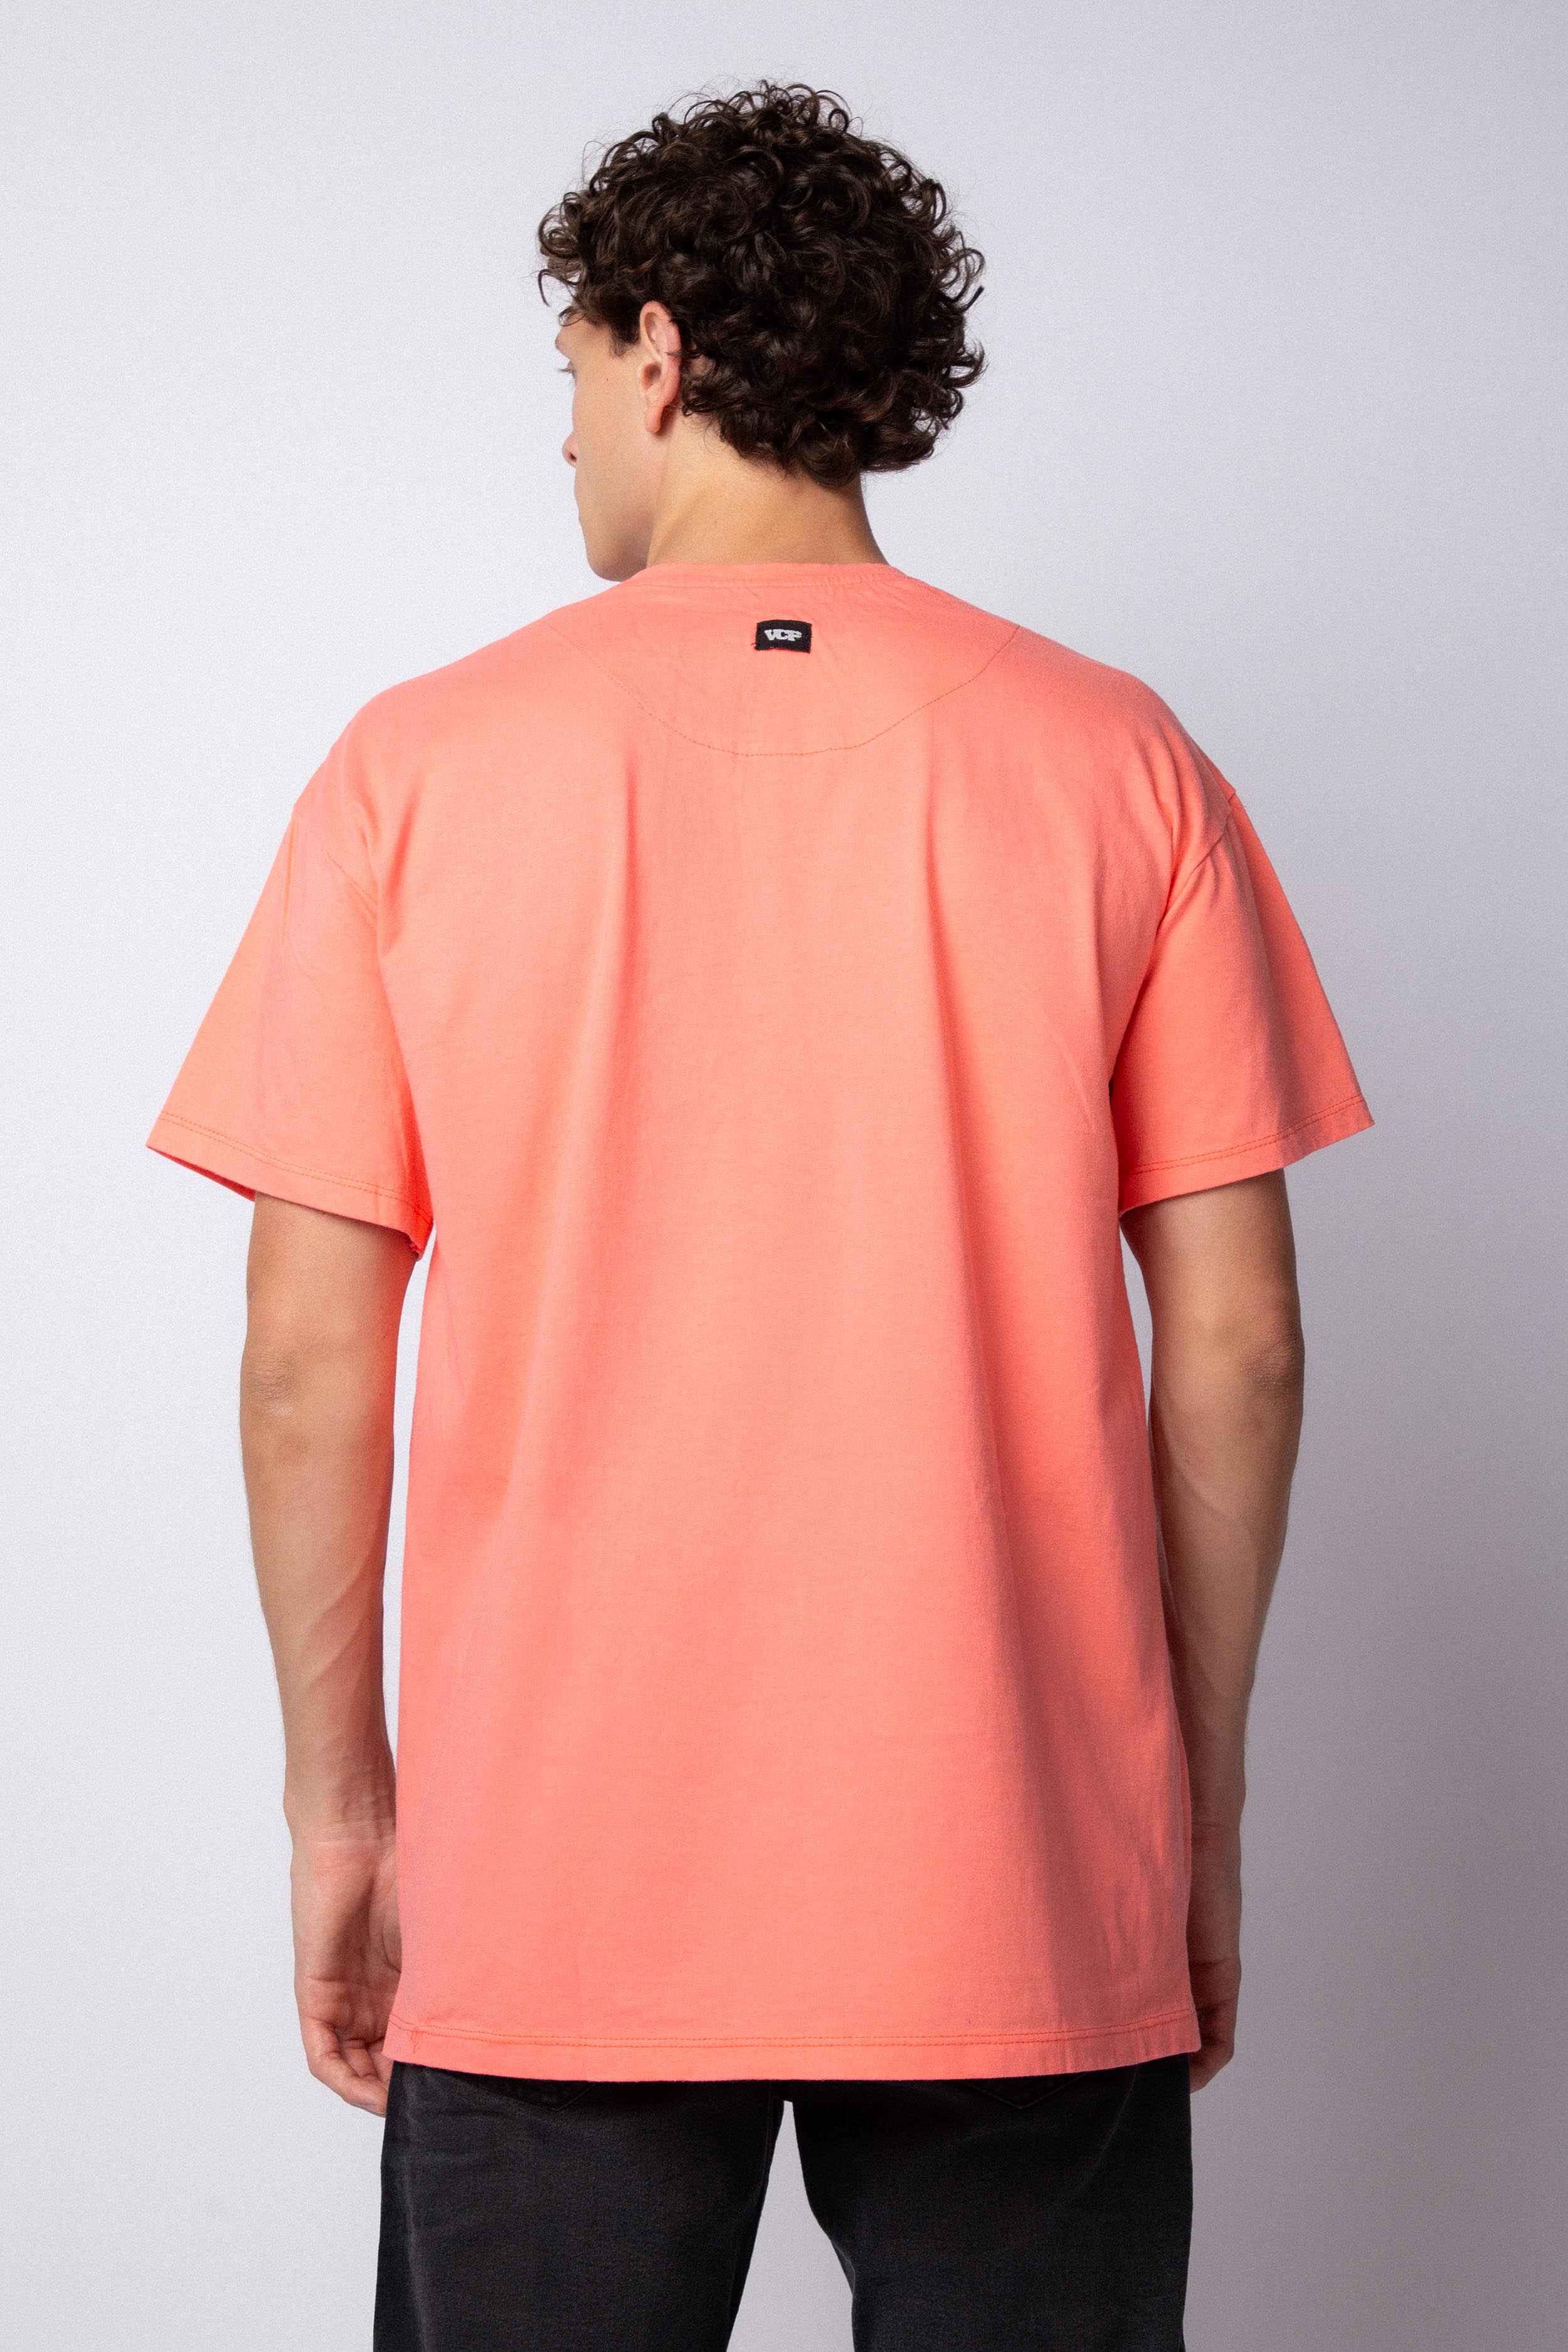 Remera Over-Size Kut Coral